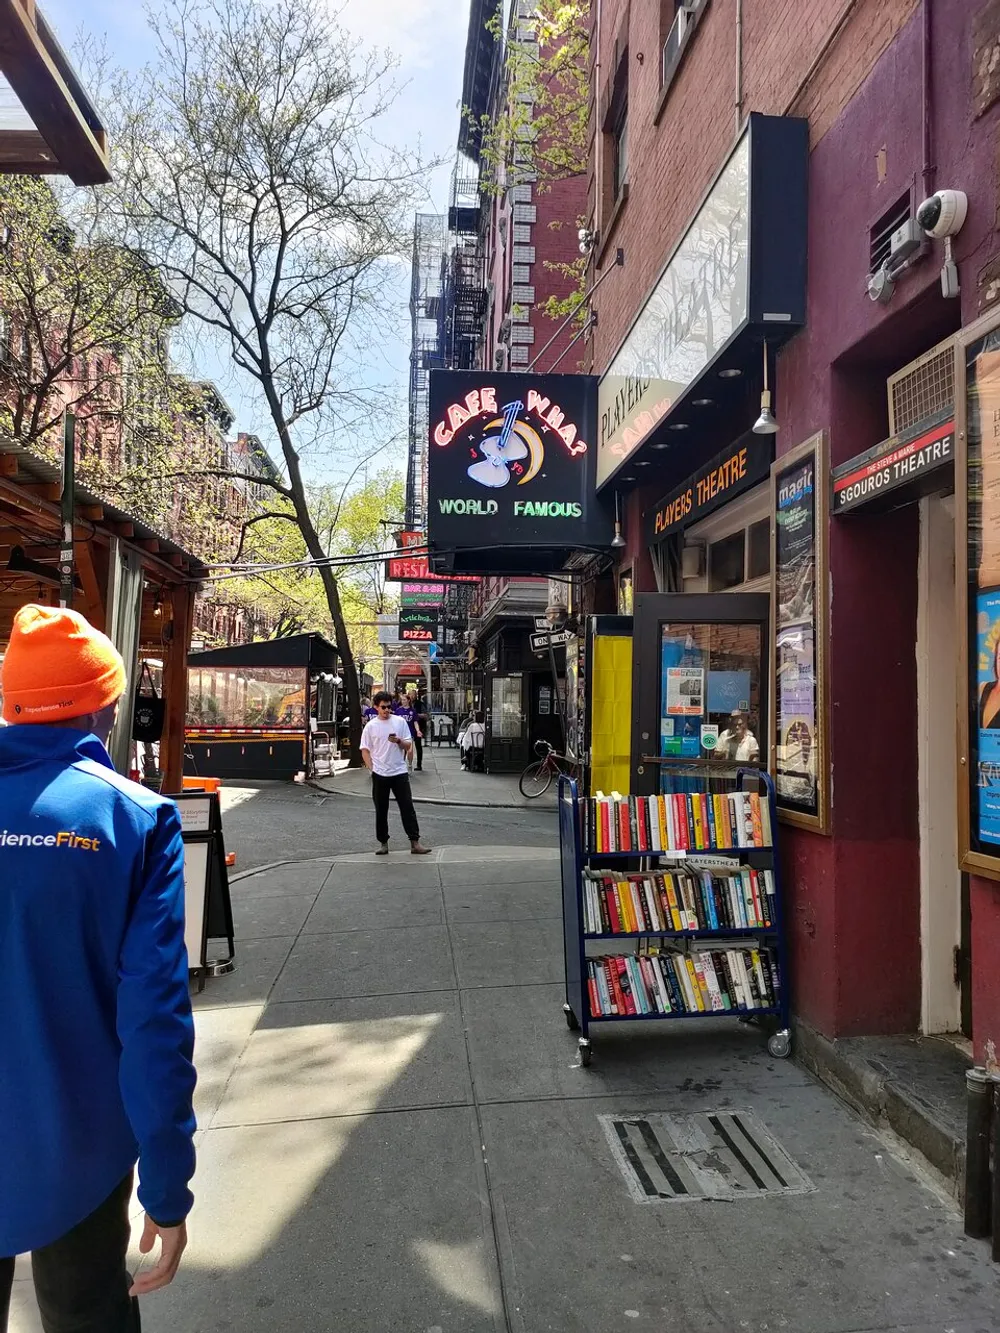 The image shows a bustling street scene with various signs including one for Caf Wha claiming to be world-famous and people walking by a stand filled with books